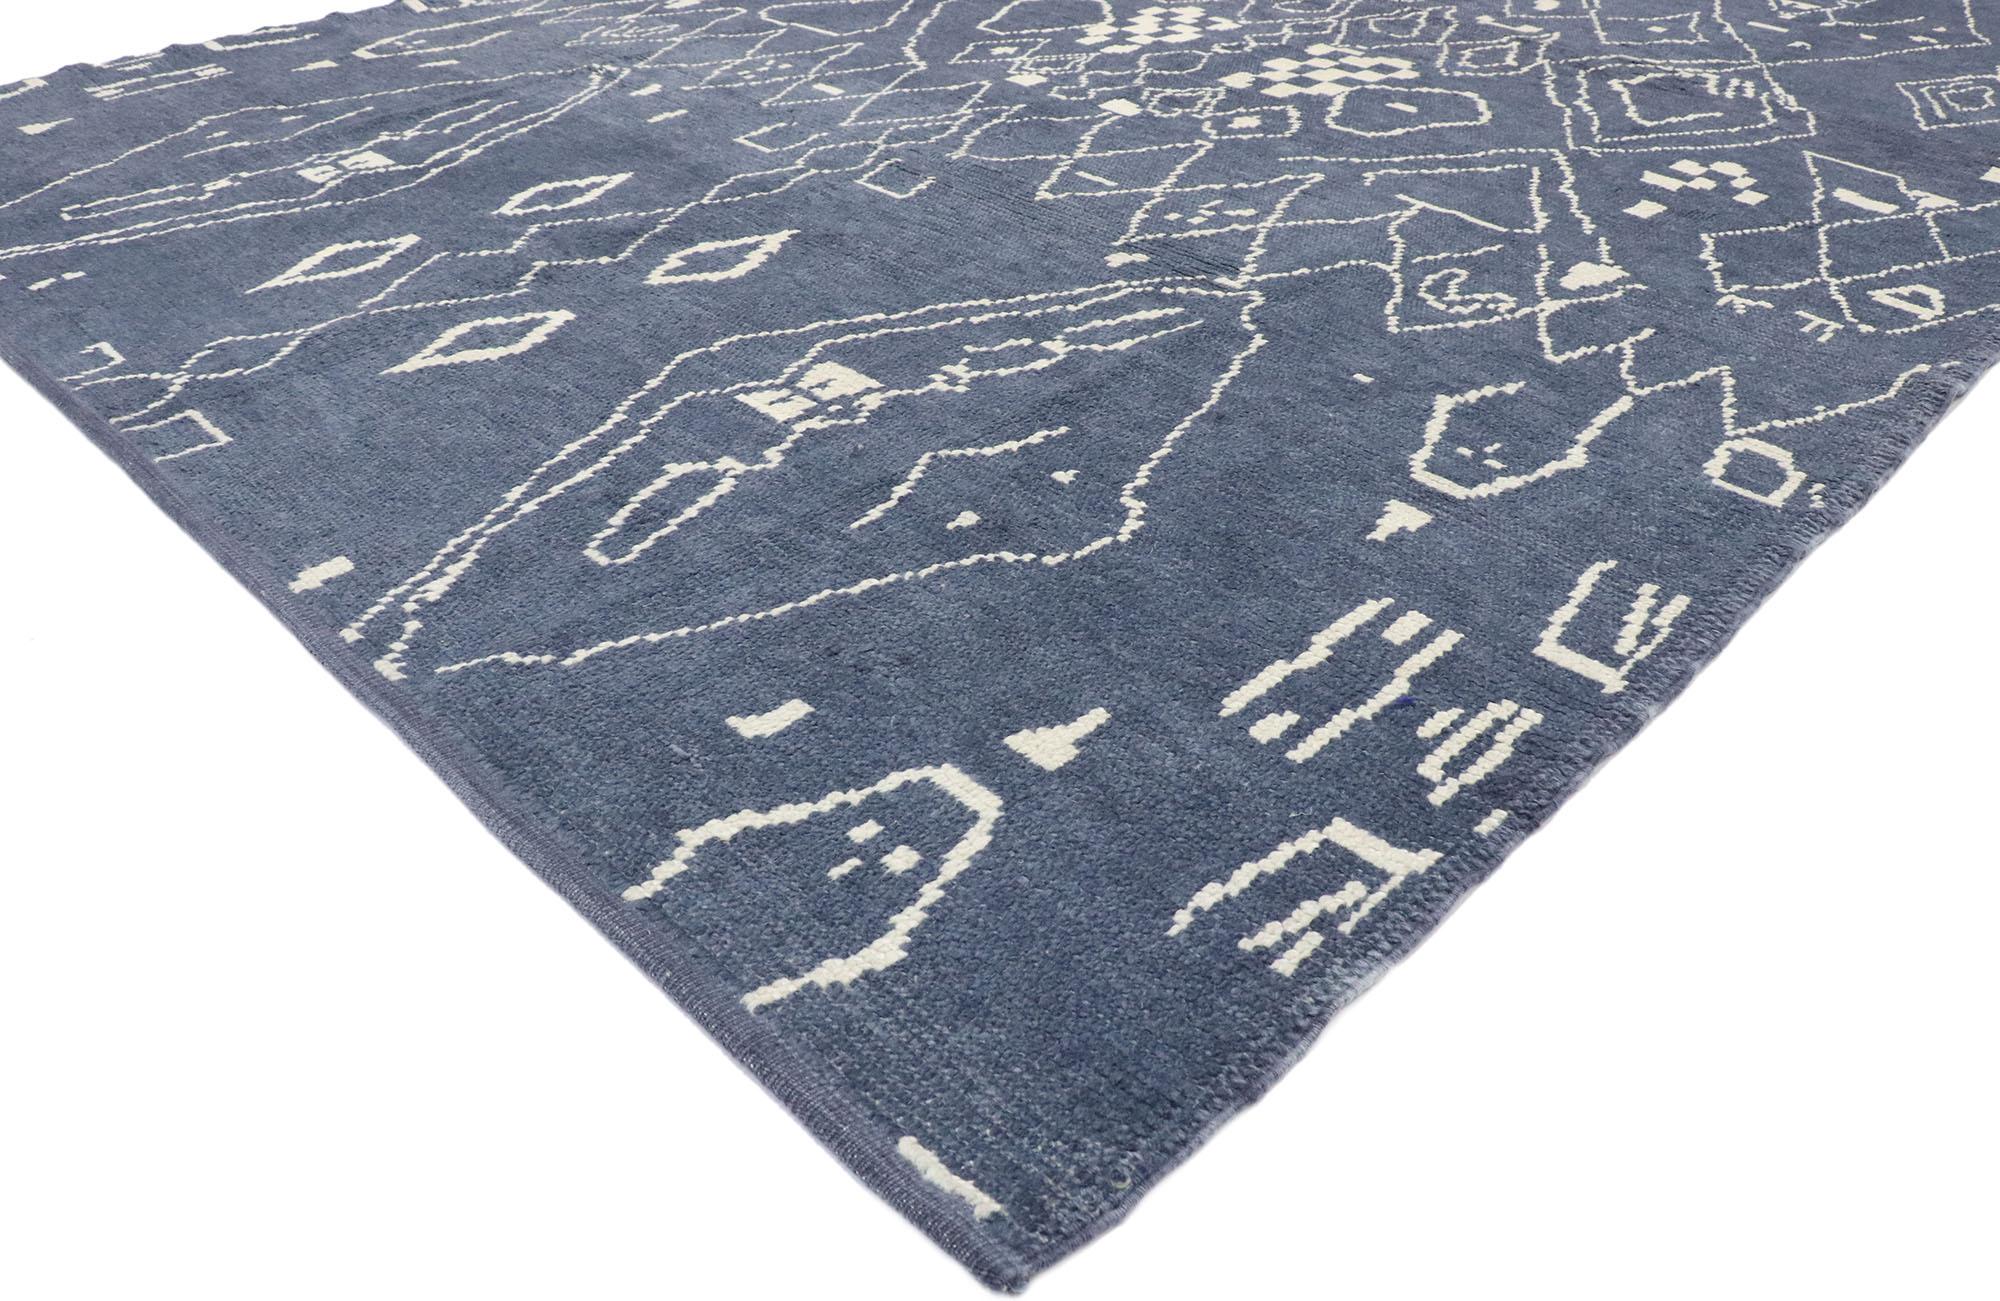 53444, new Contemporary Moroccan style rug with Tribal Design. With its tribal style, incredible detail and texture, this hand knotted wool contemporary Moroccan rug is a captivating vision of woven beauty and a joy to walk upon. The abrashed navy